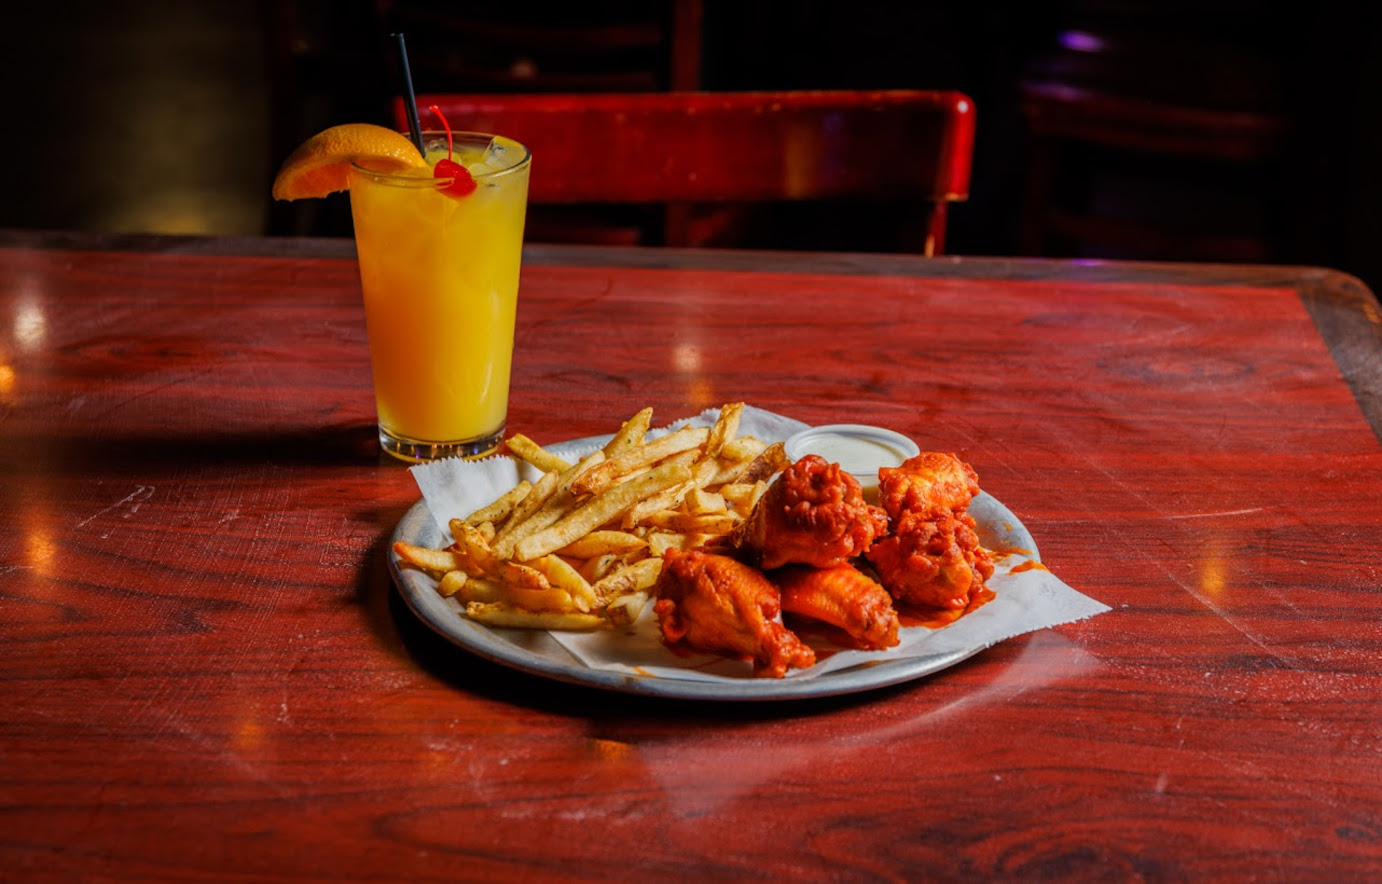 Buffalo wings, fries, sauce dip, and a cocktail.